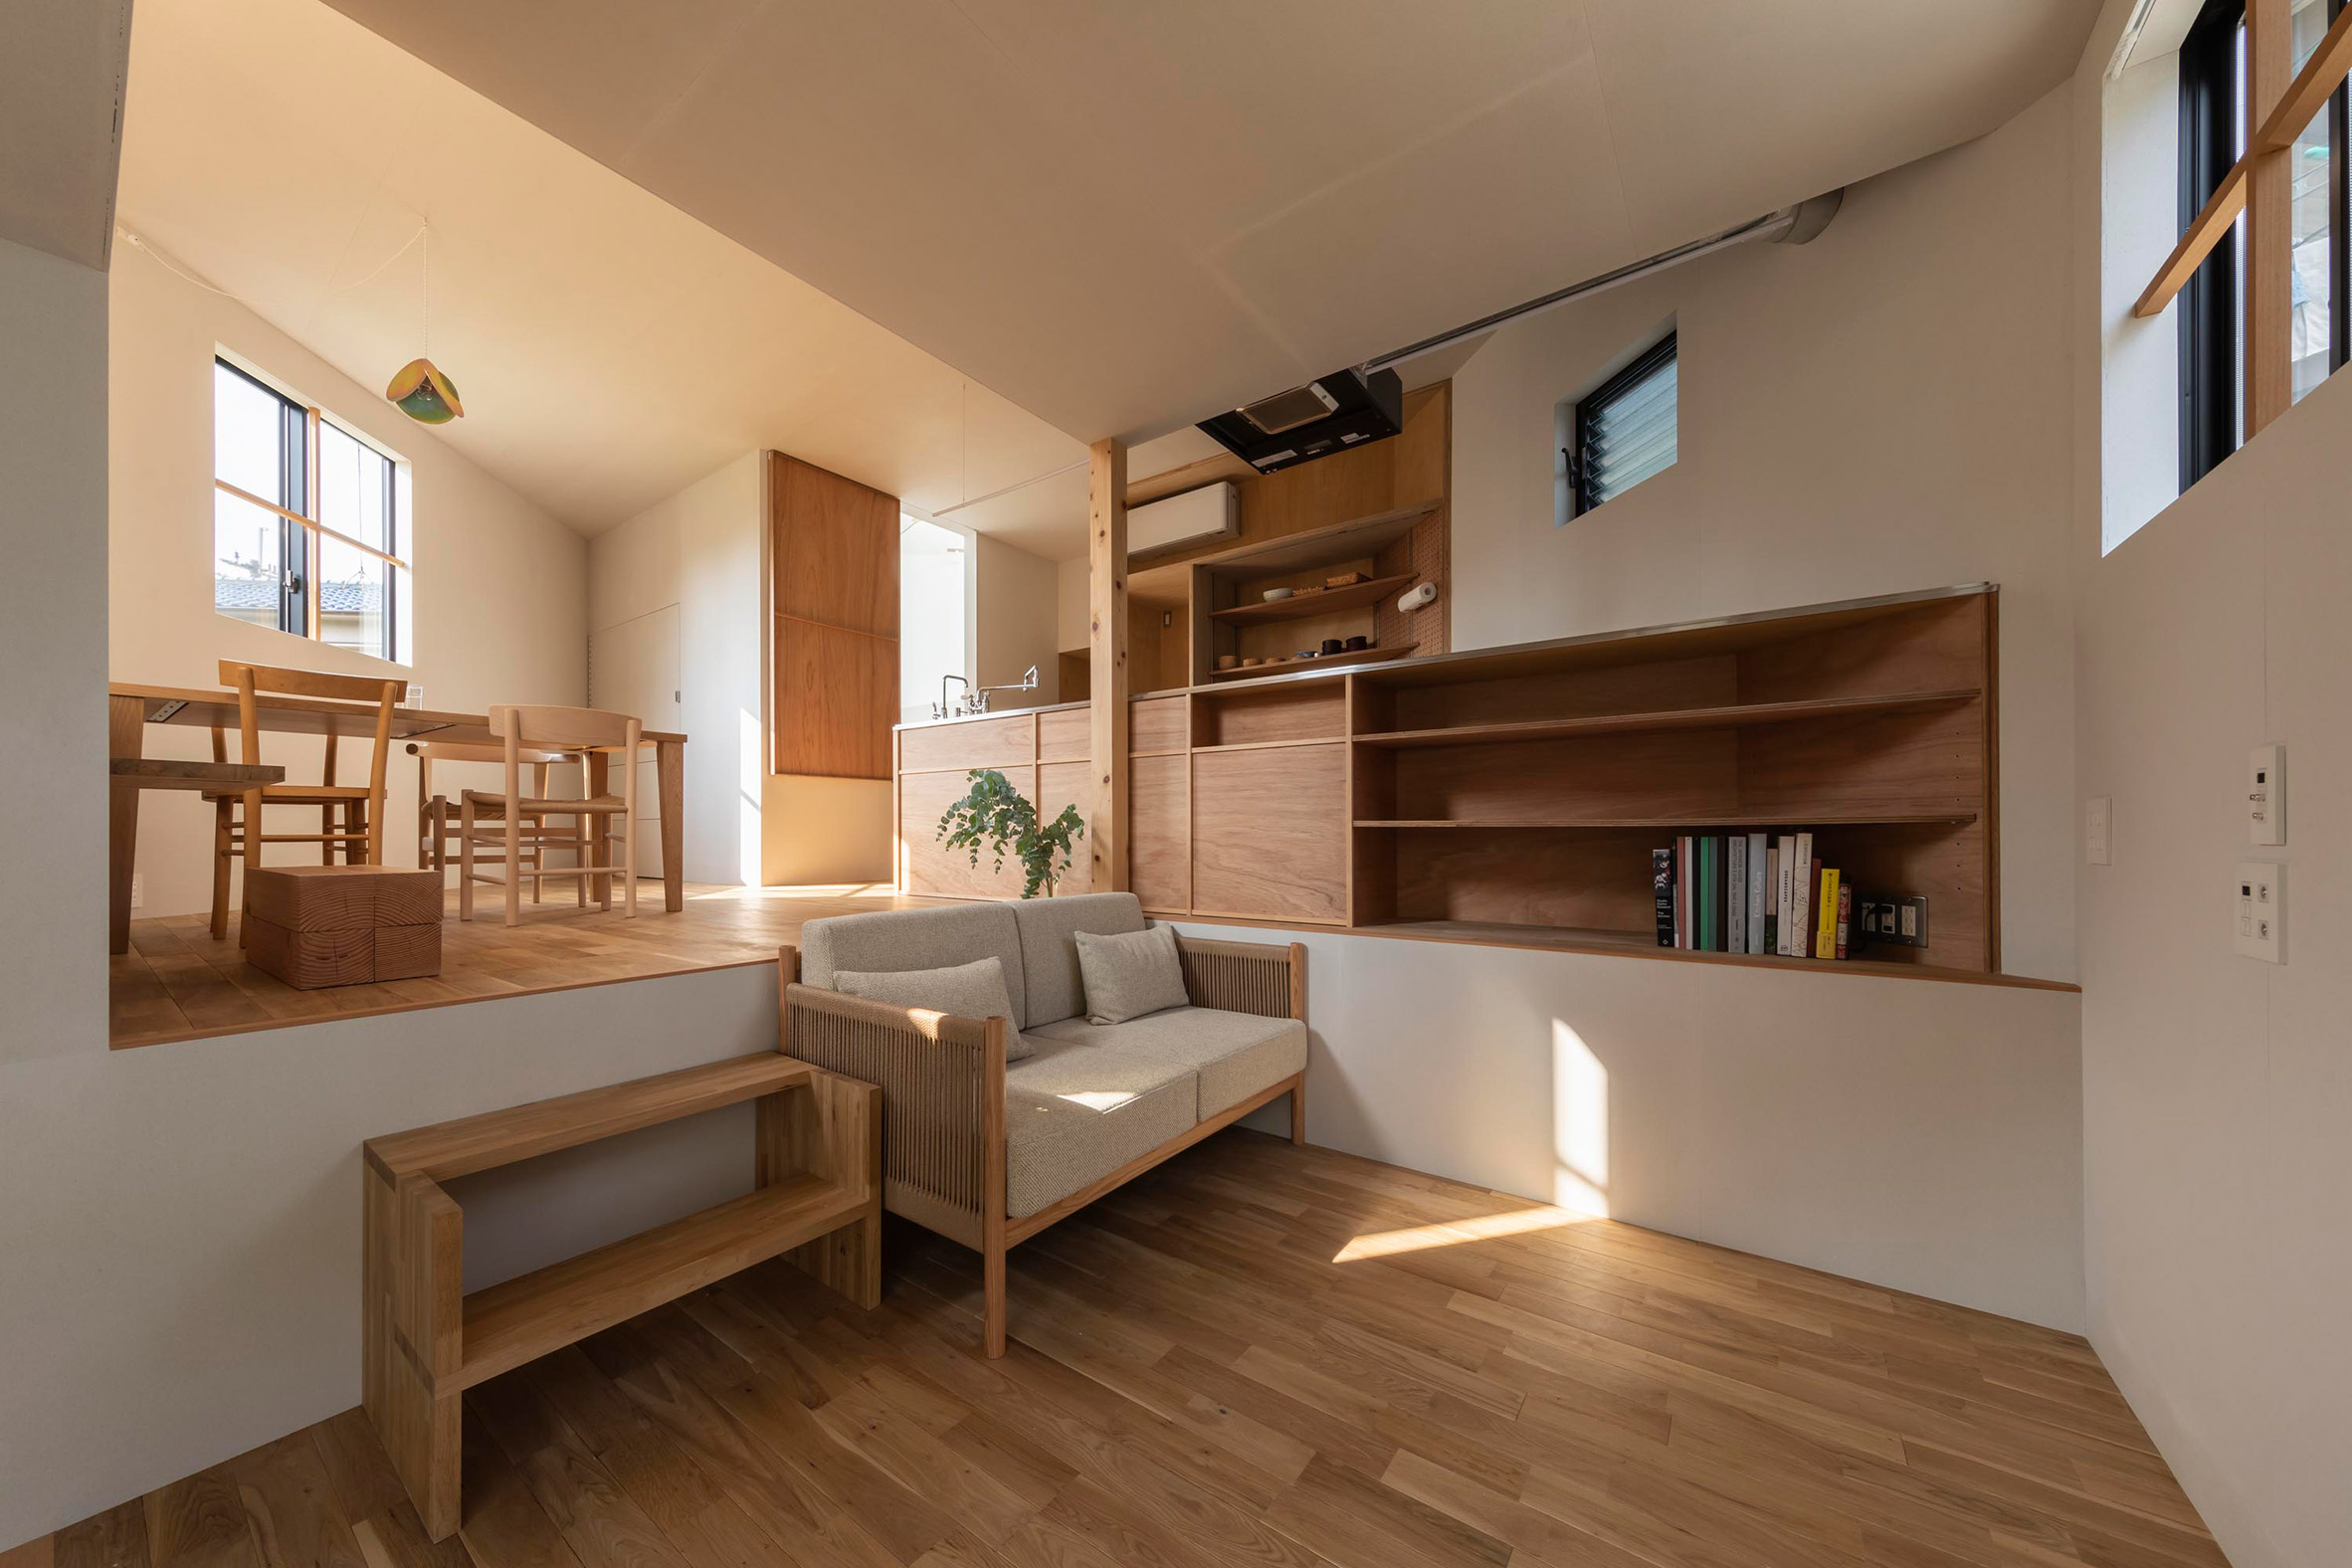 House in Takatsuki by Tato Architects living room